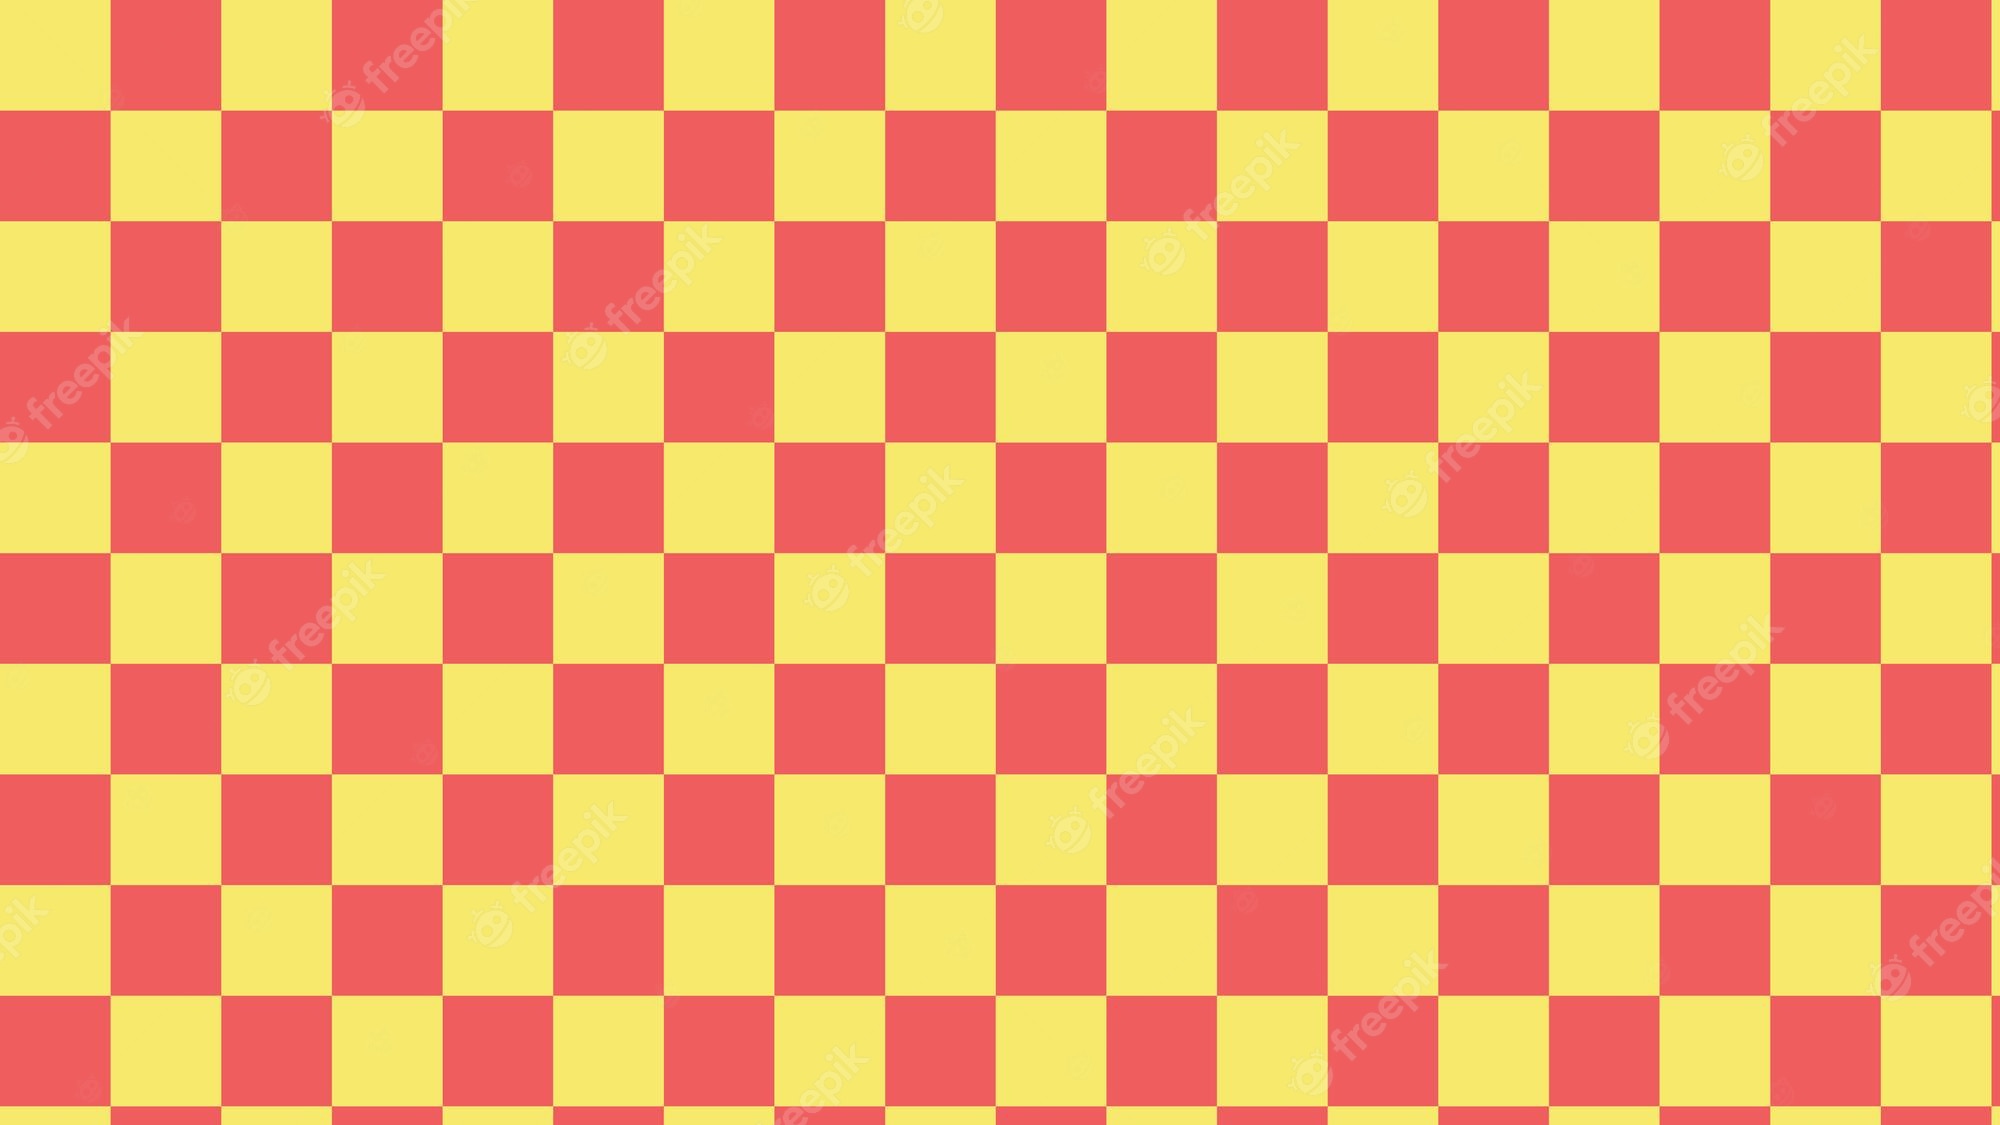 Premium Vector. Cute pastel orange and yellow checkers gingham plaid checkerboard pattern aesthetic wallpaper illustration perfect for wallpaper backdrop postcard background for your design